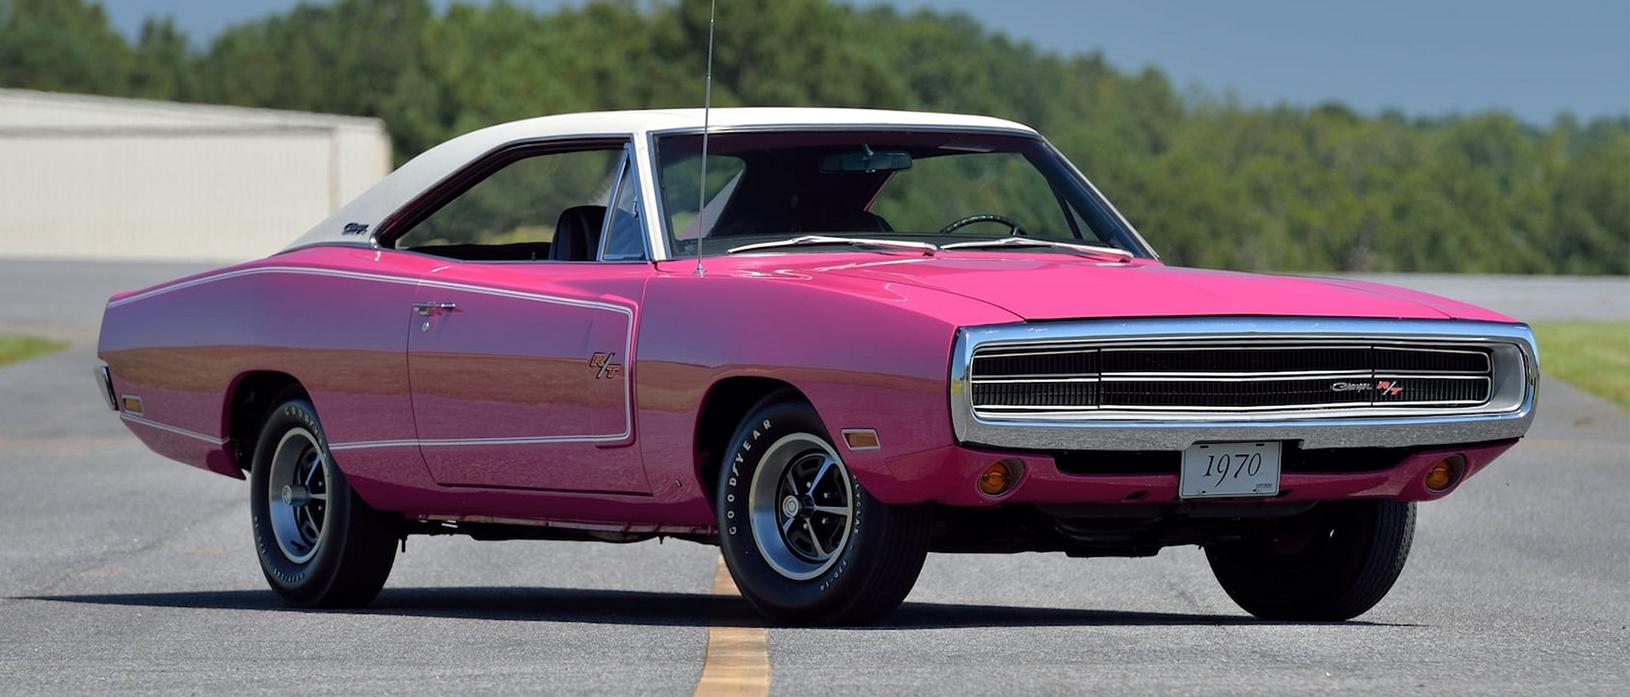 This 1970 Dodge Charger R/T is Looking for a New Home